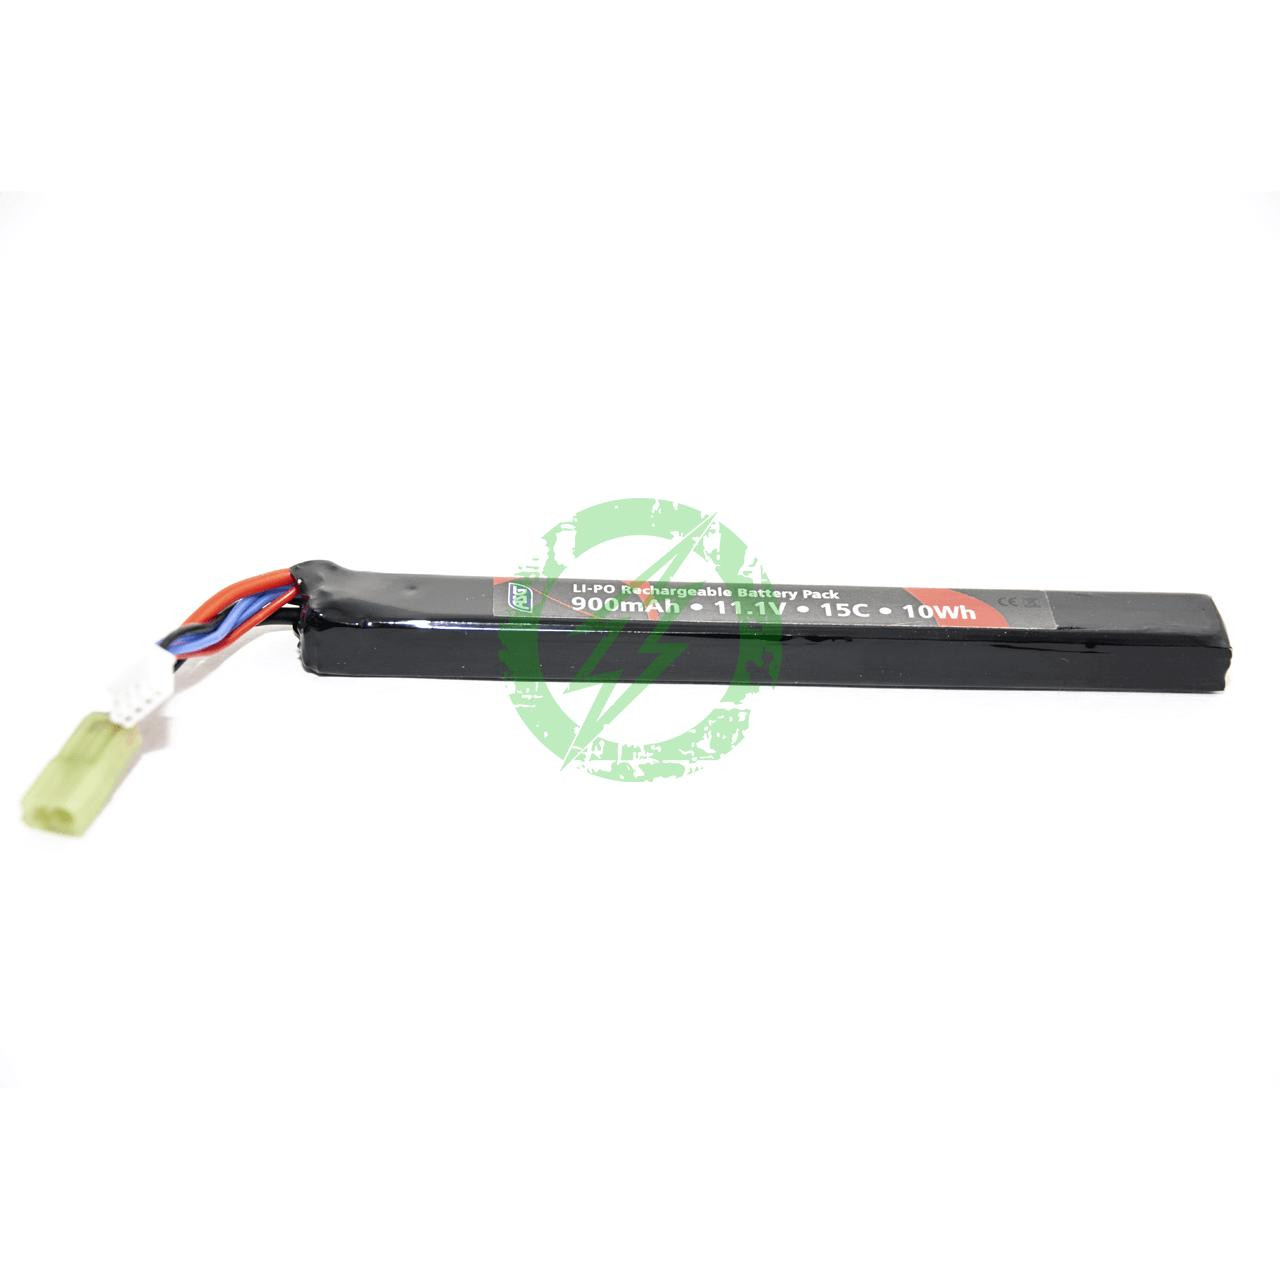 Action Sport Games (ASG) Action Sport Games 11.1V 900mah 15C Stick Lipo Battery 